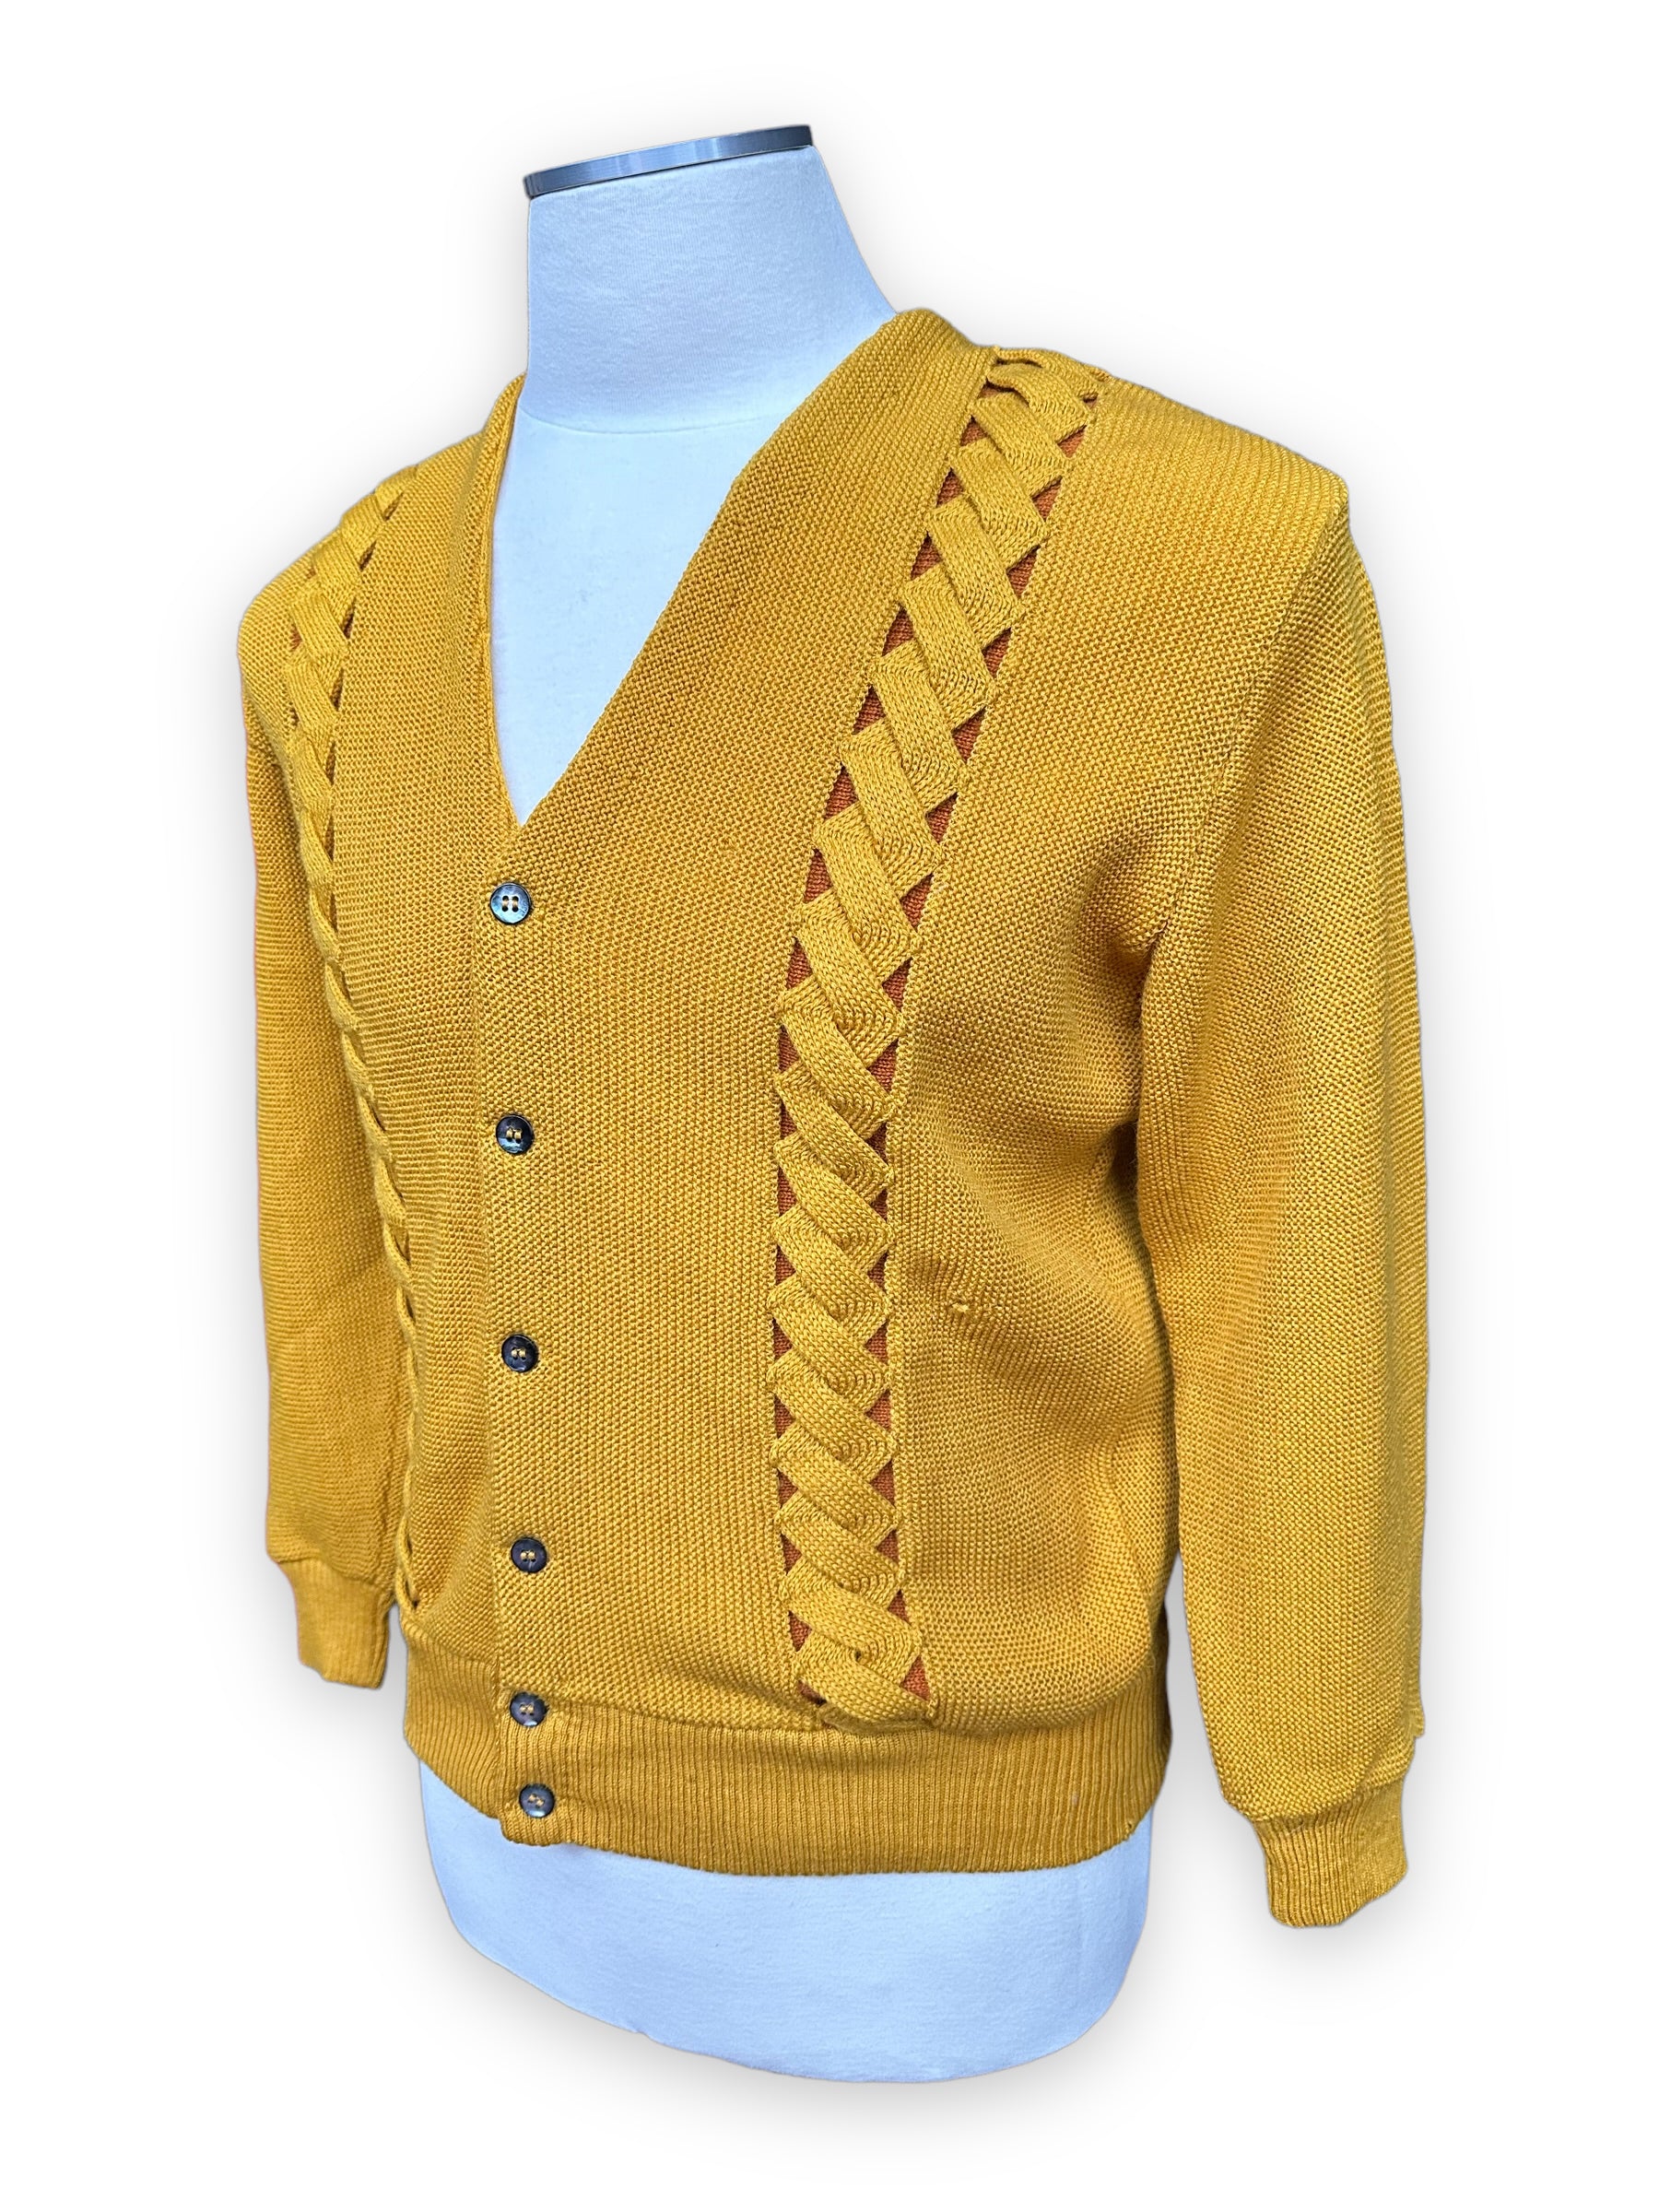 Left Front Quarter View of Vintage Seattle Knitting Mills Golden Double Helix Wool Sweater SZ M |  Vintage Cardigan Sweaters Seattle | Barn Owl Vintage Seattle